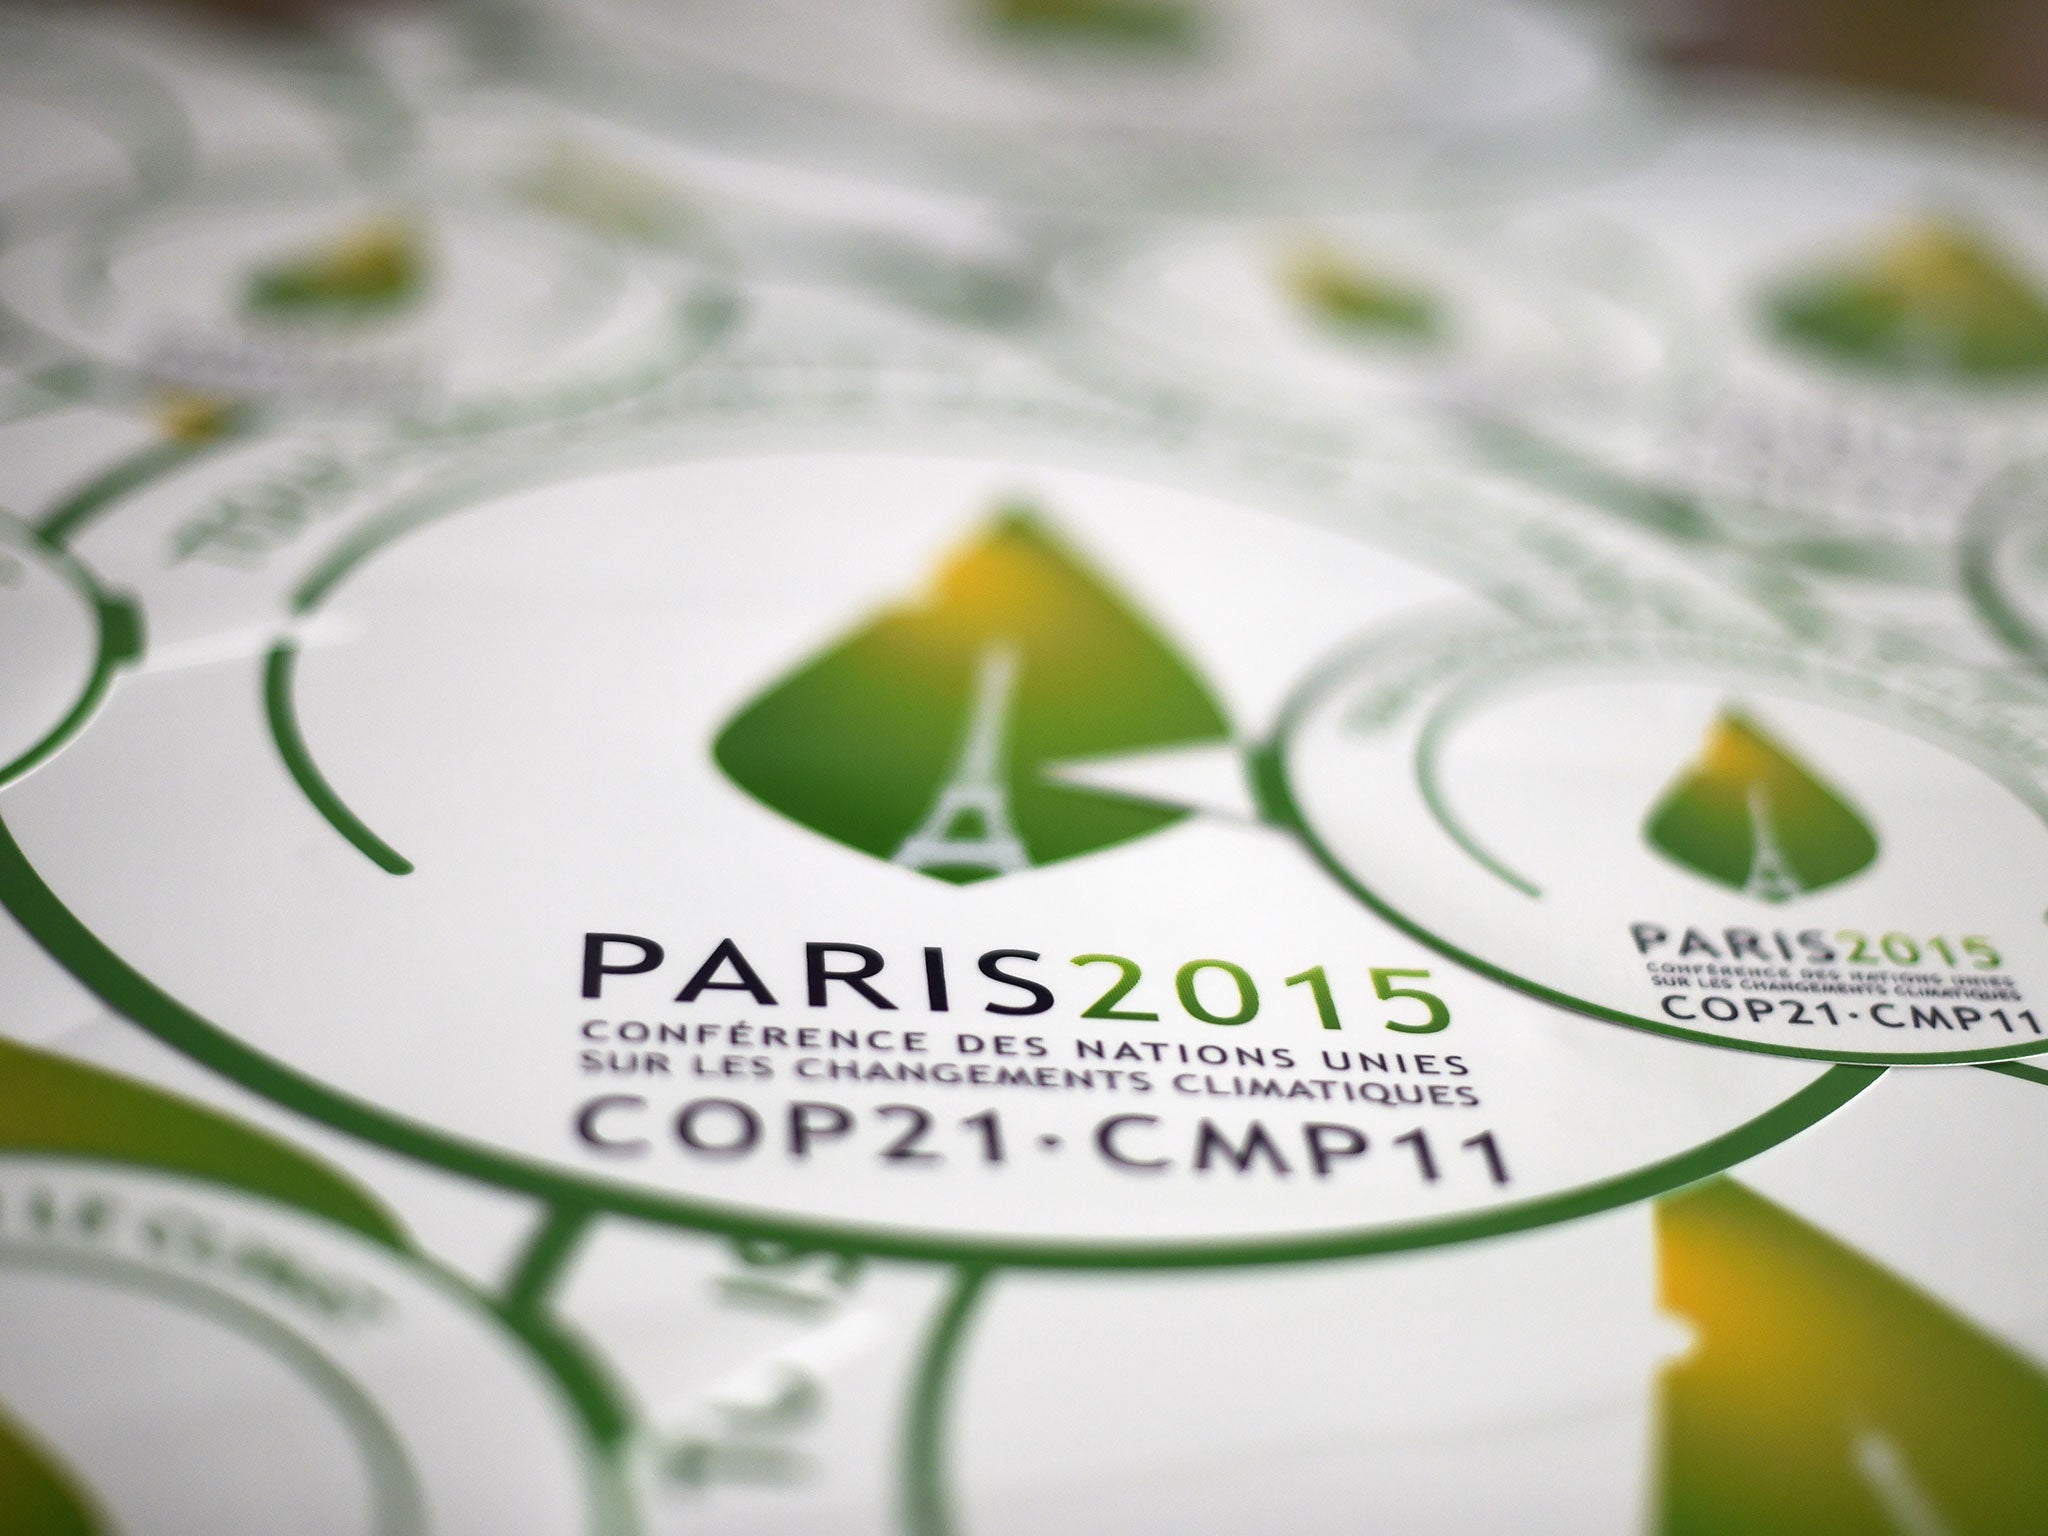 Stickers for the COP21, in Paris, ahead of the Climate Change Conference 2015